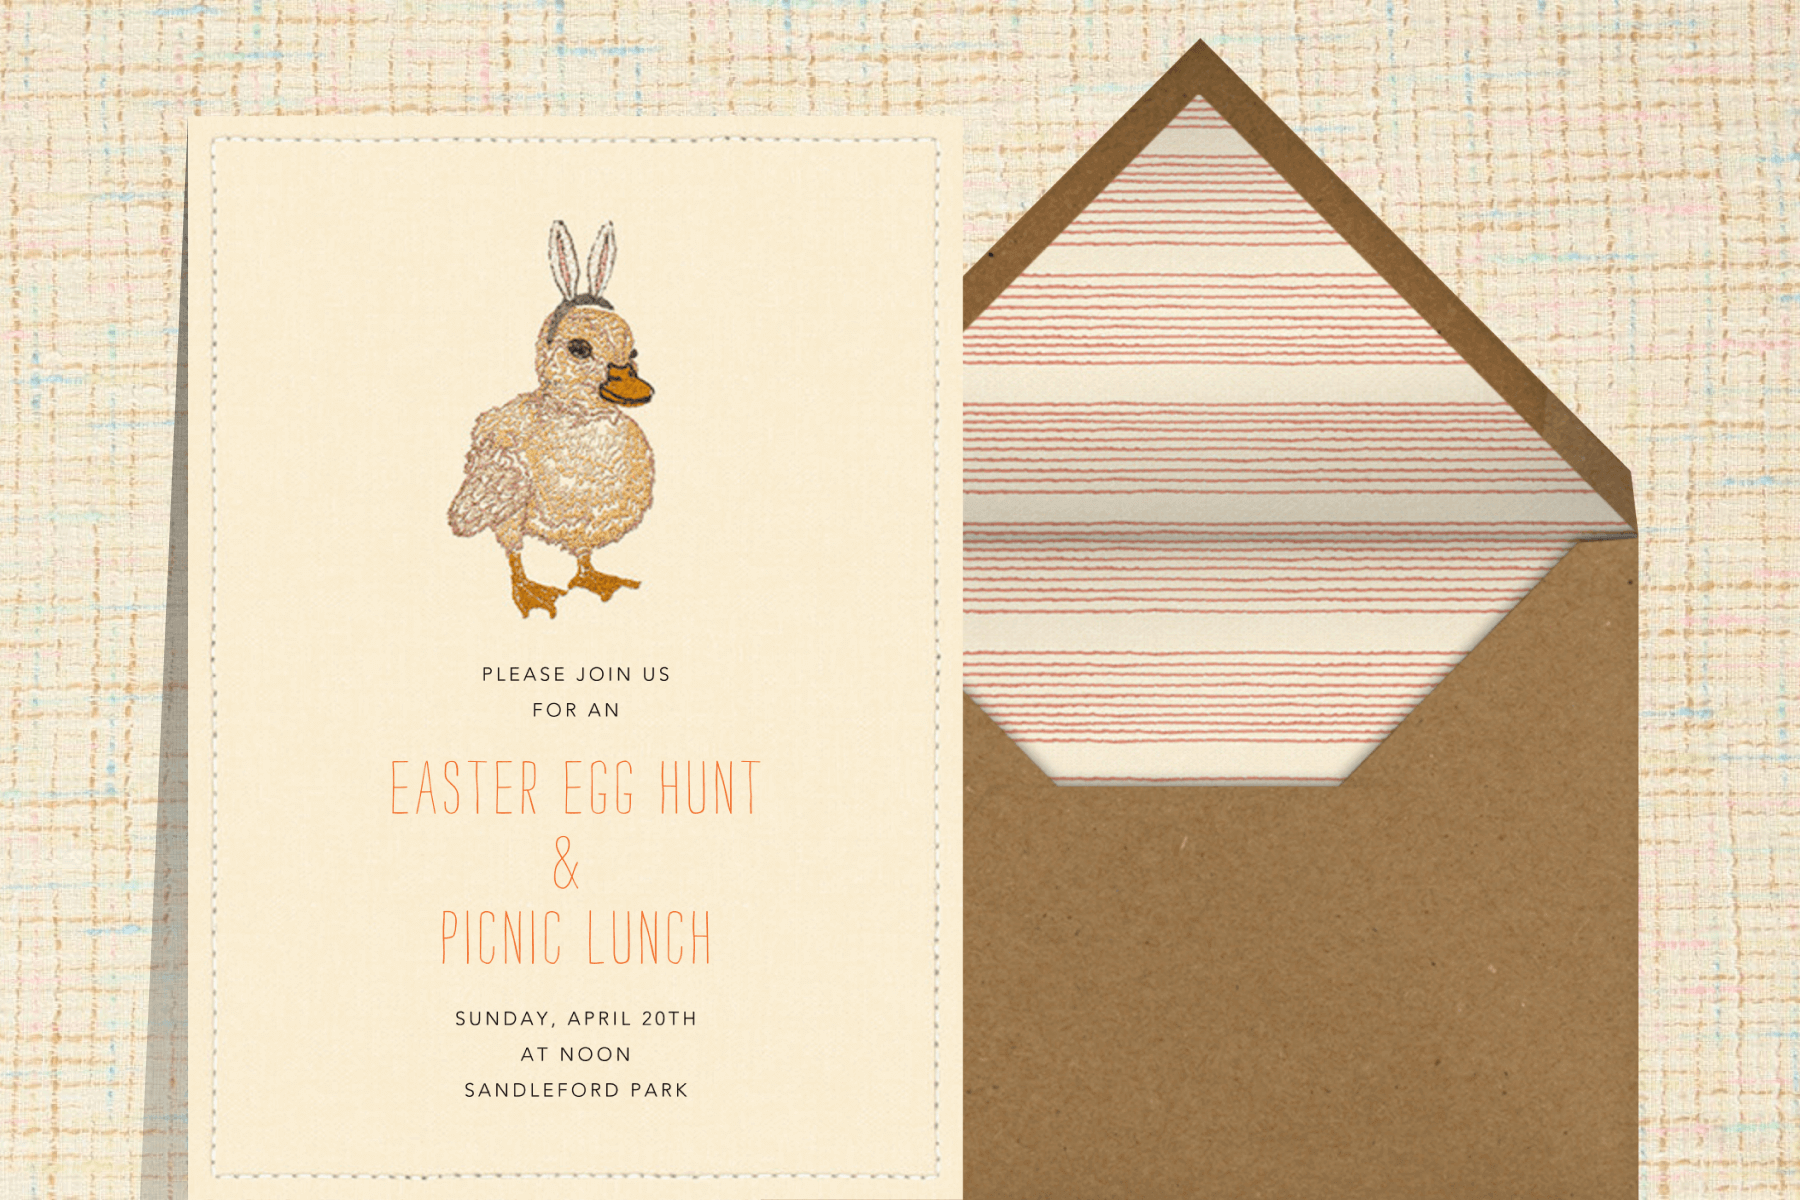 An invitation featuring an embroidered duckling wearing bunny ears.